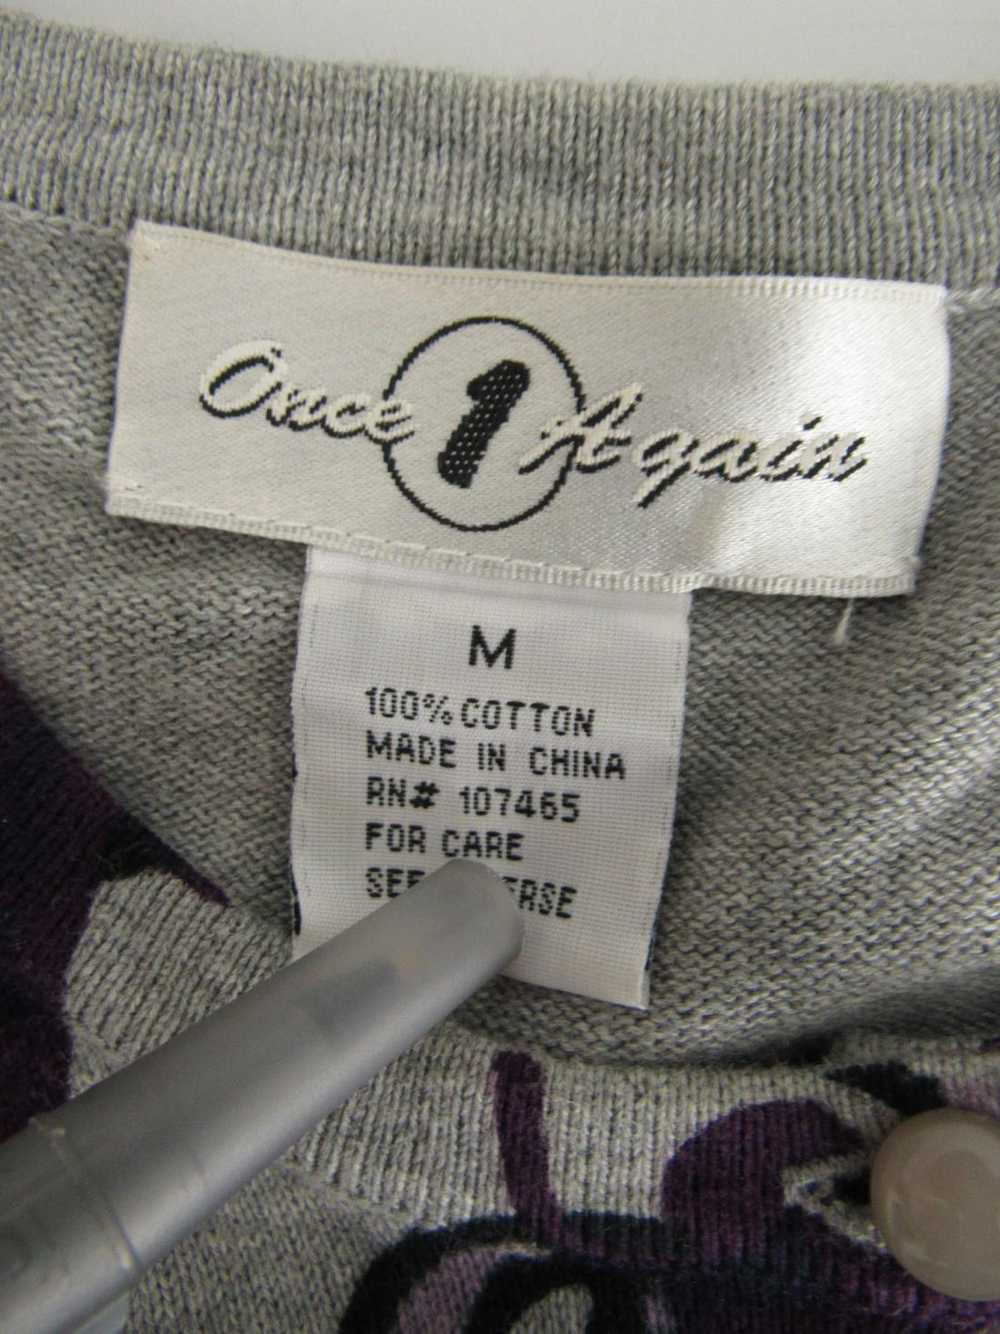 Once Again Cardigan Sweater - image 3